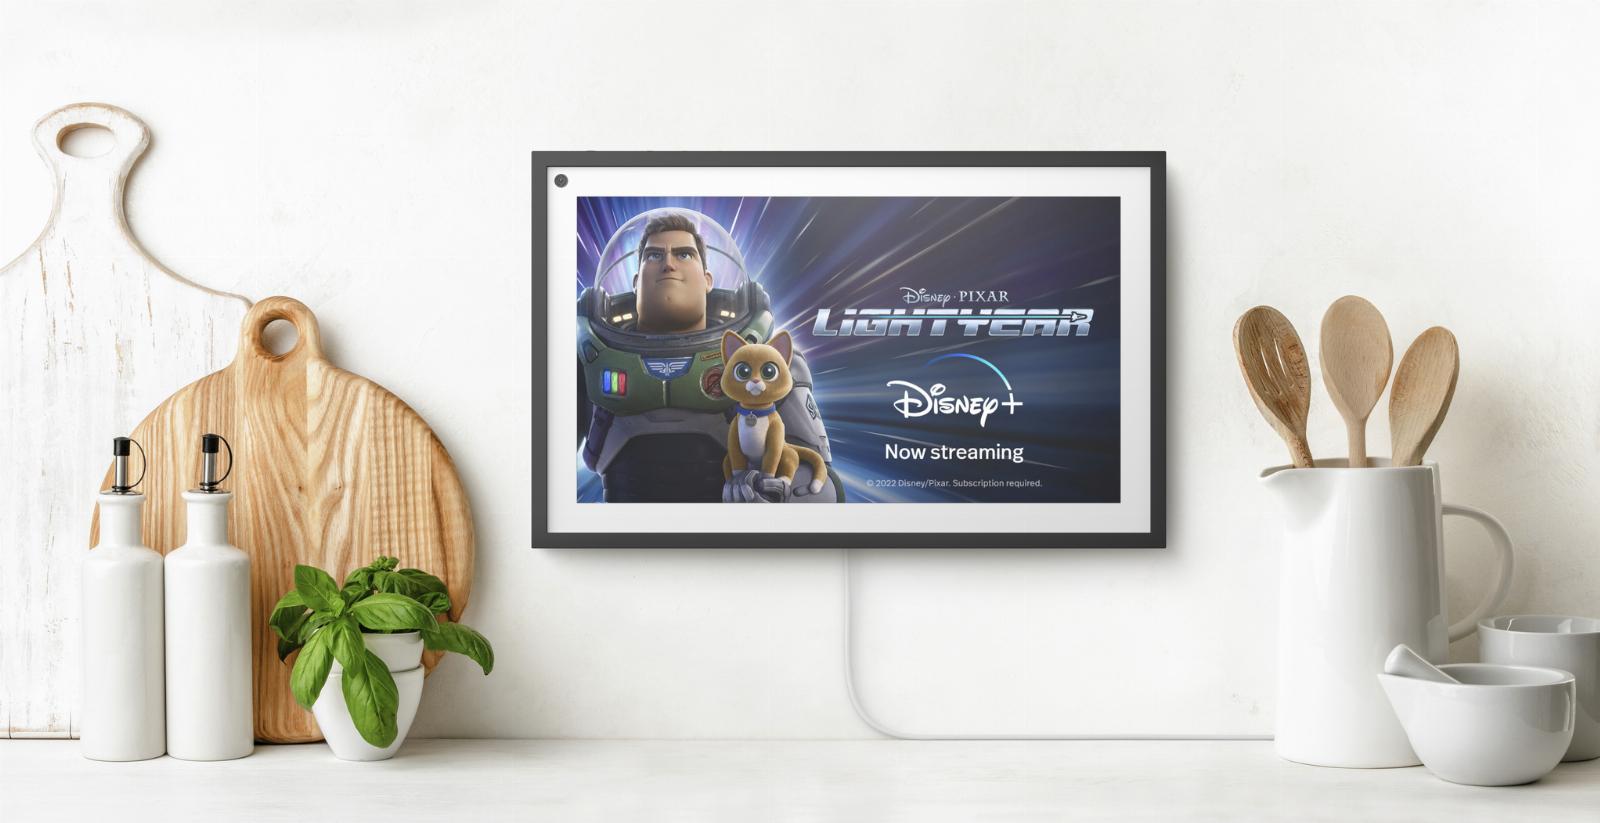 Amazon adds Matter Casting to its smart displays and TVs